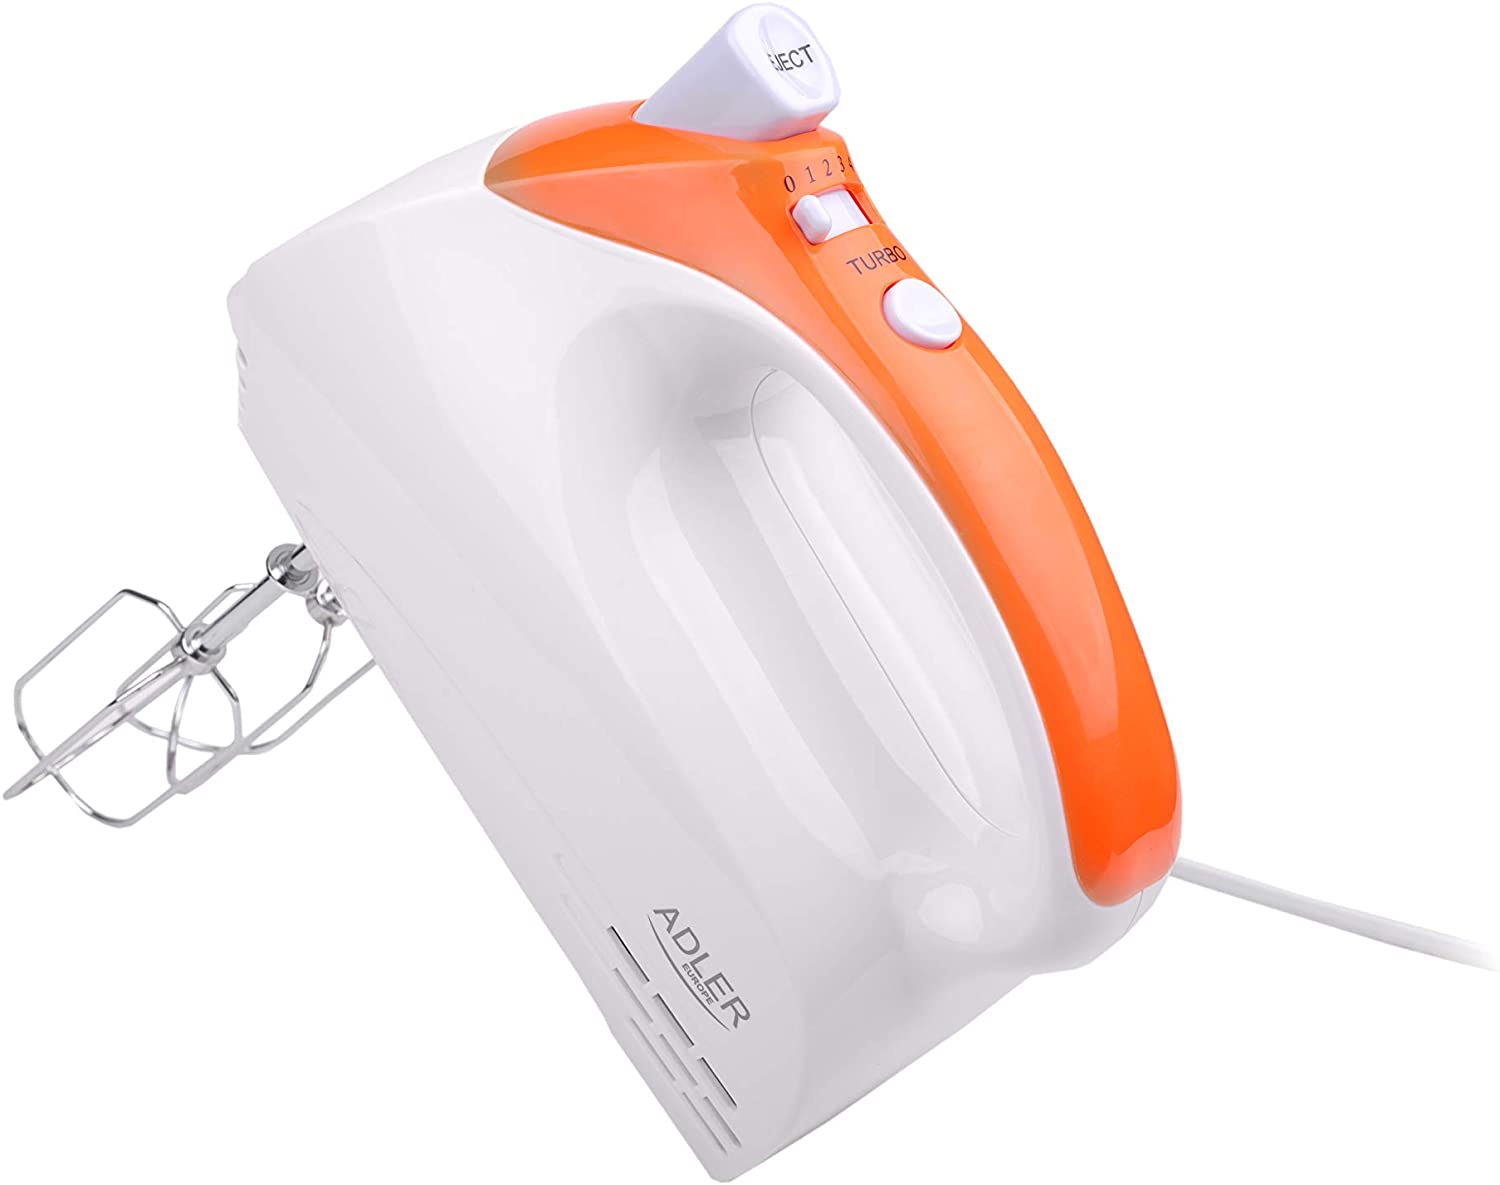 Hand Mixer Hand Blender Professional Stainless Steel Mixer 300 Watt Whiks and Dough Attachment from Stainless Steel (Orange)